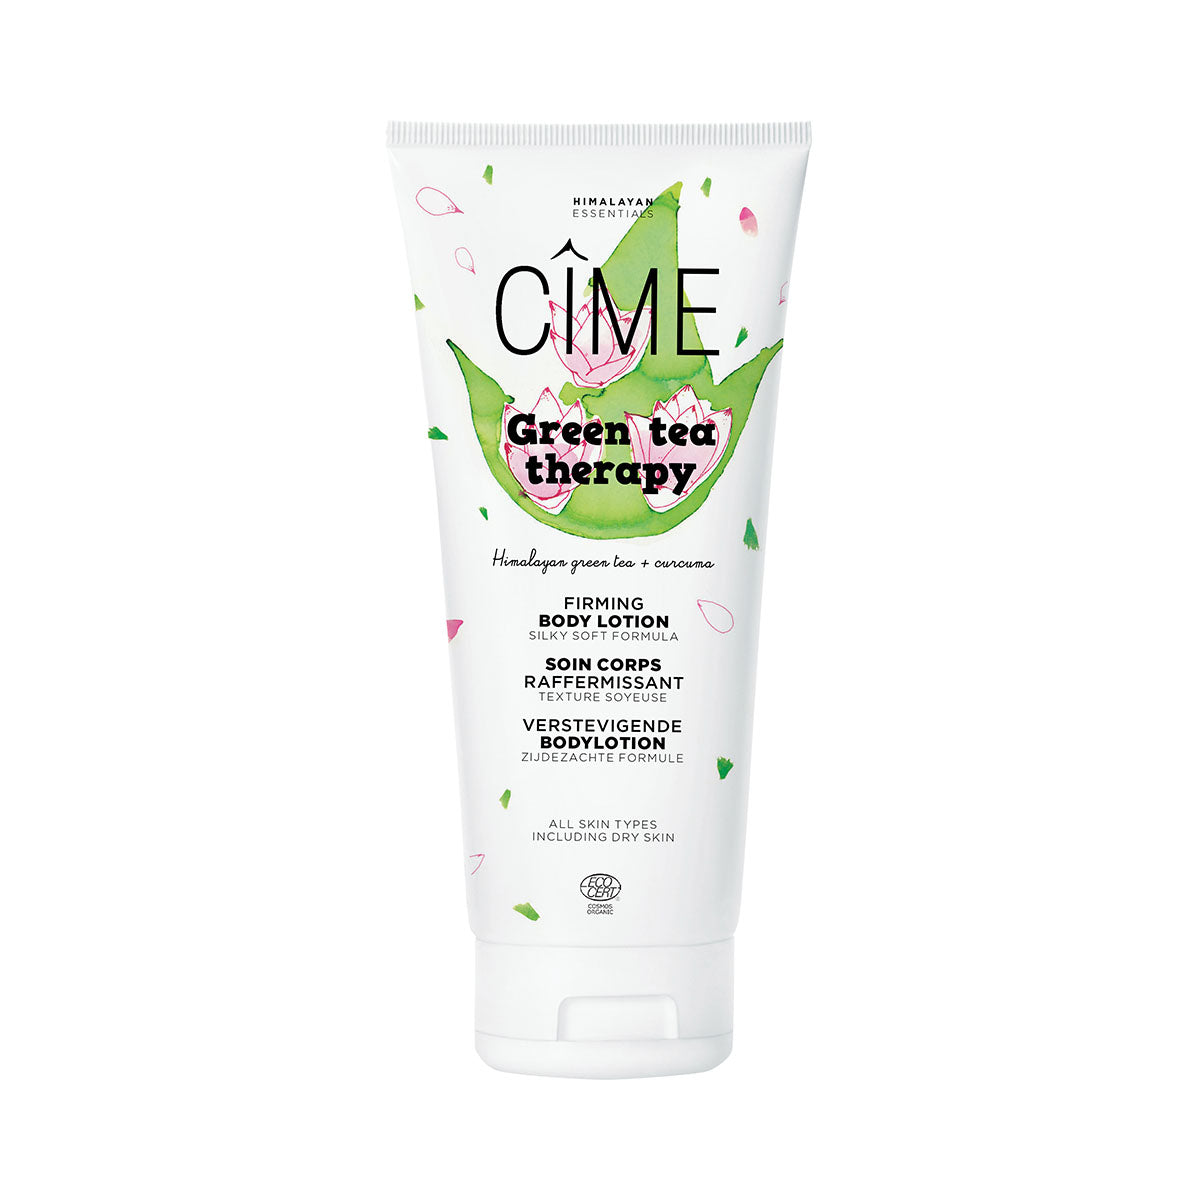 CÎME Green tea therapy | Firming body lotion 200mL